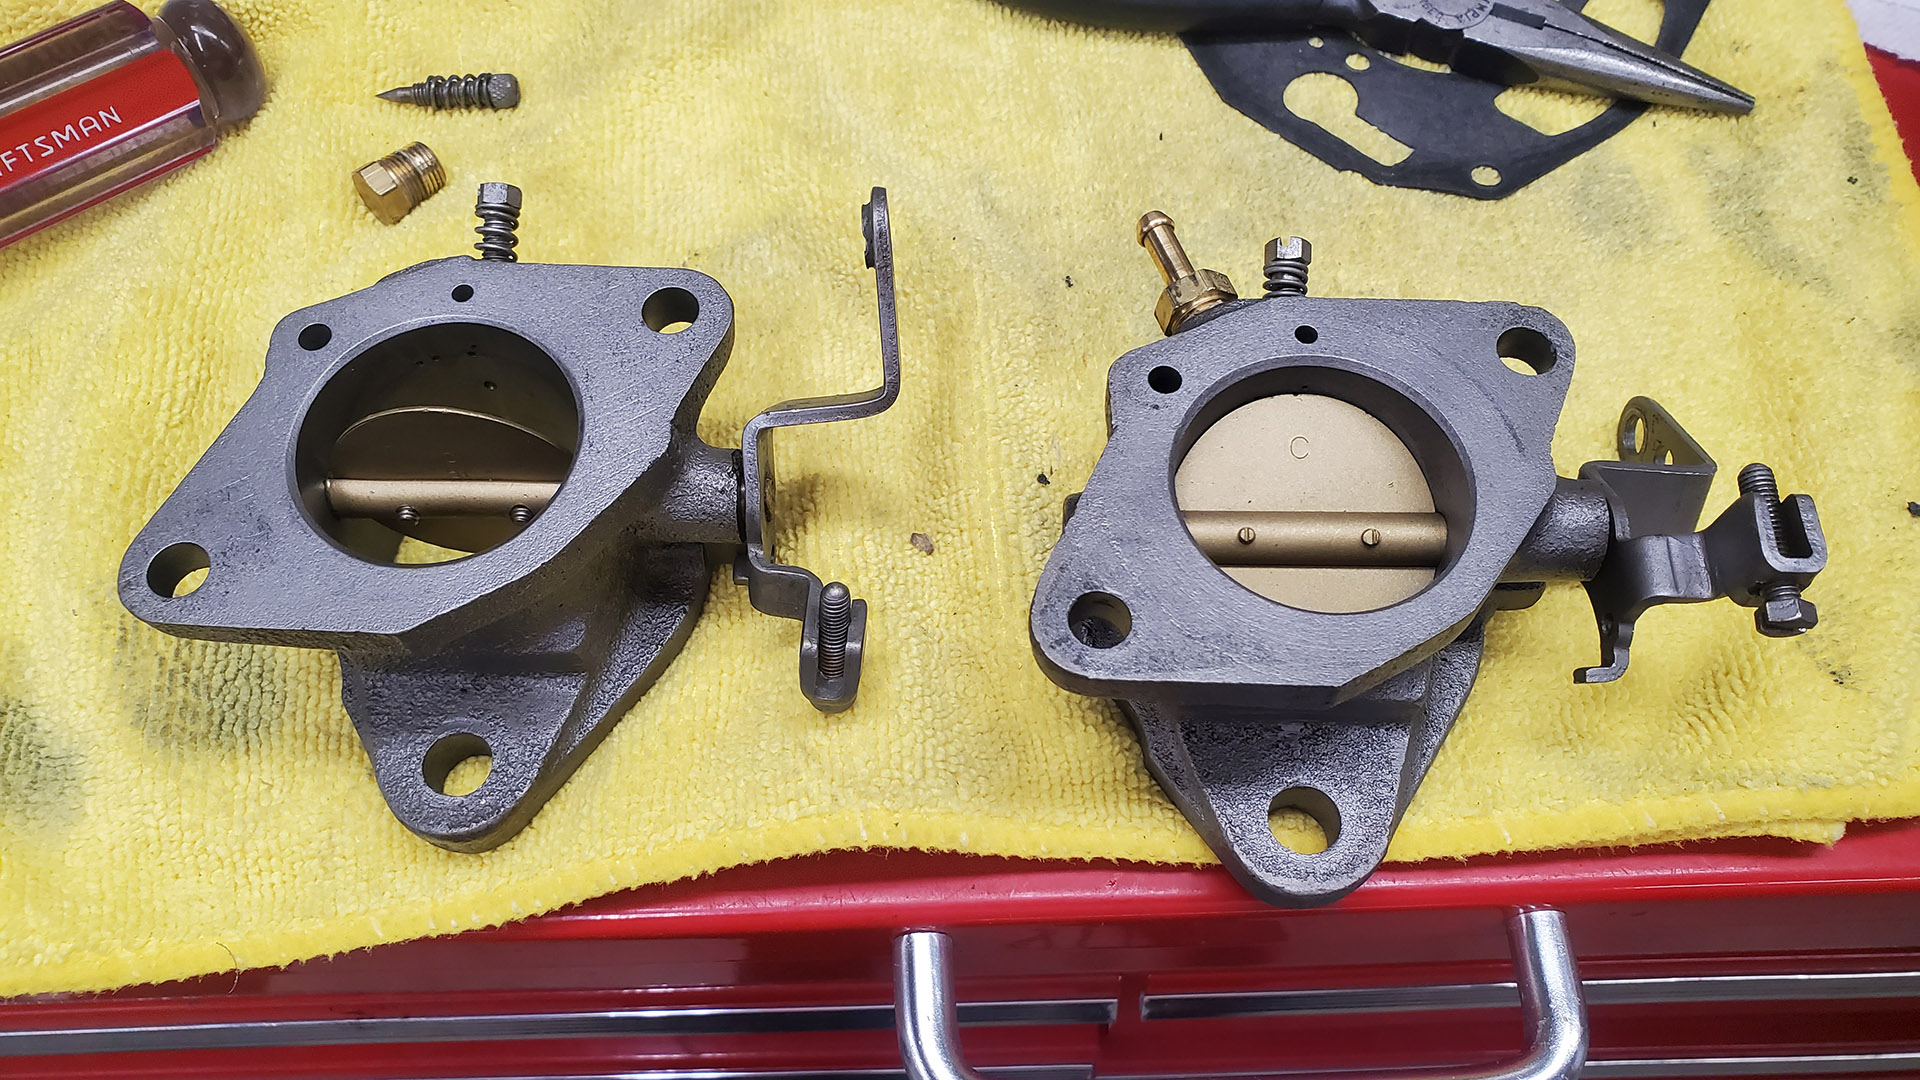 You can't tell from the photo alone, but the throttle body on the left is junk.